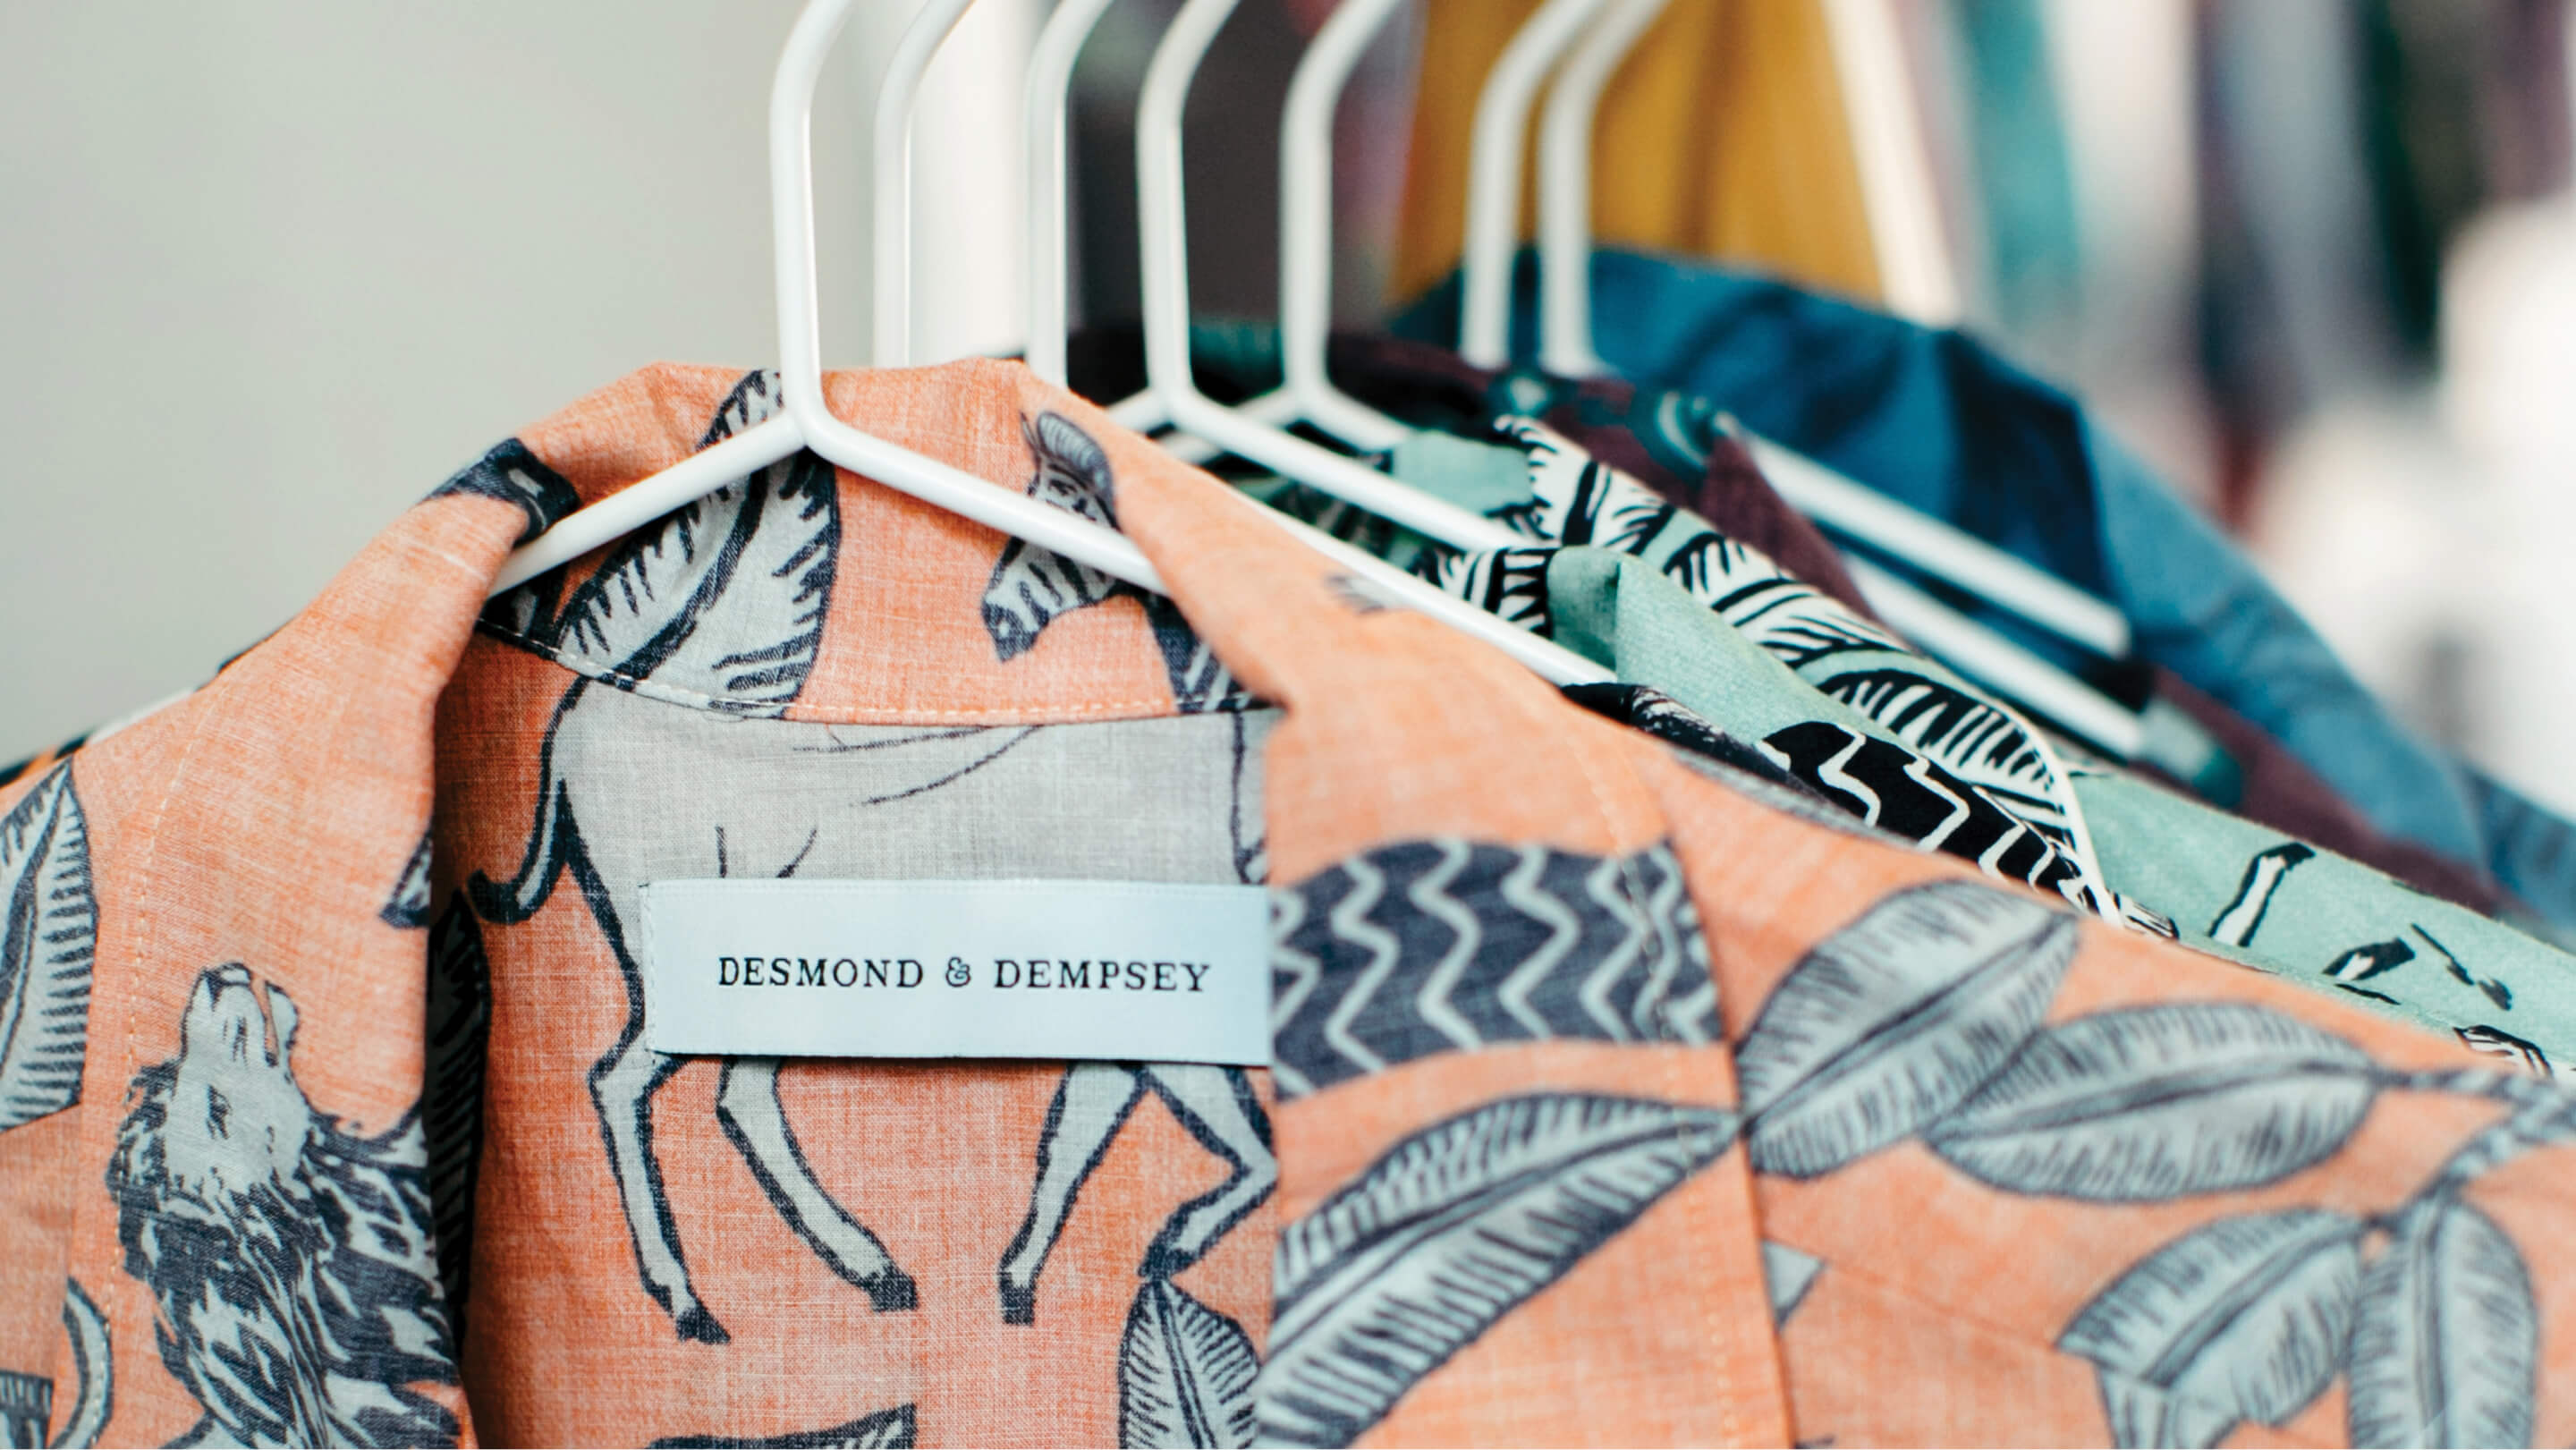 The collar of an orange shirt with black printed animals and plants and  Desmond & Dempsey printed on the label.